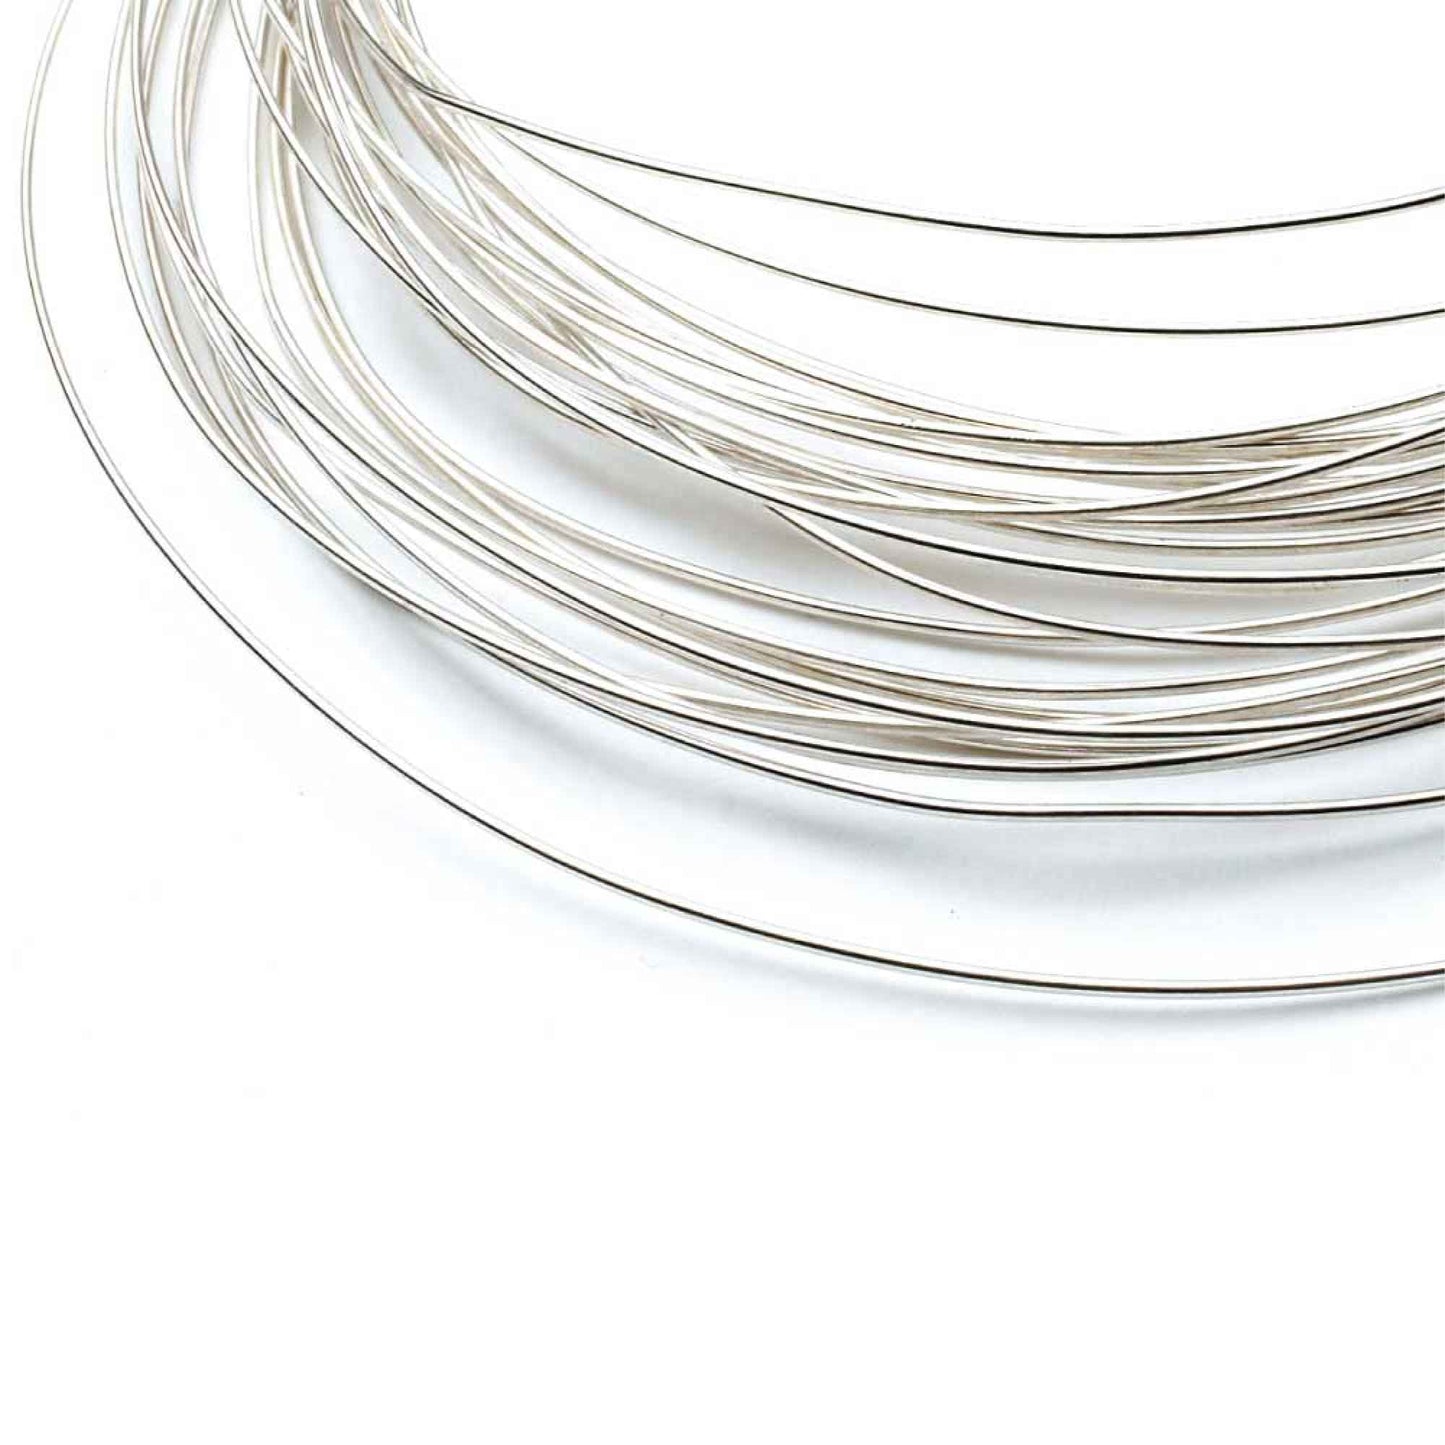 1m Sterling Silver 0.9mm -Soft Round Wire Rod 19 Gauge Jewellery Bead